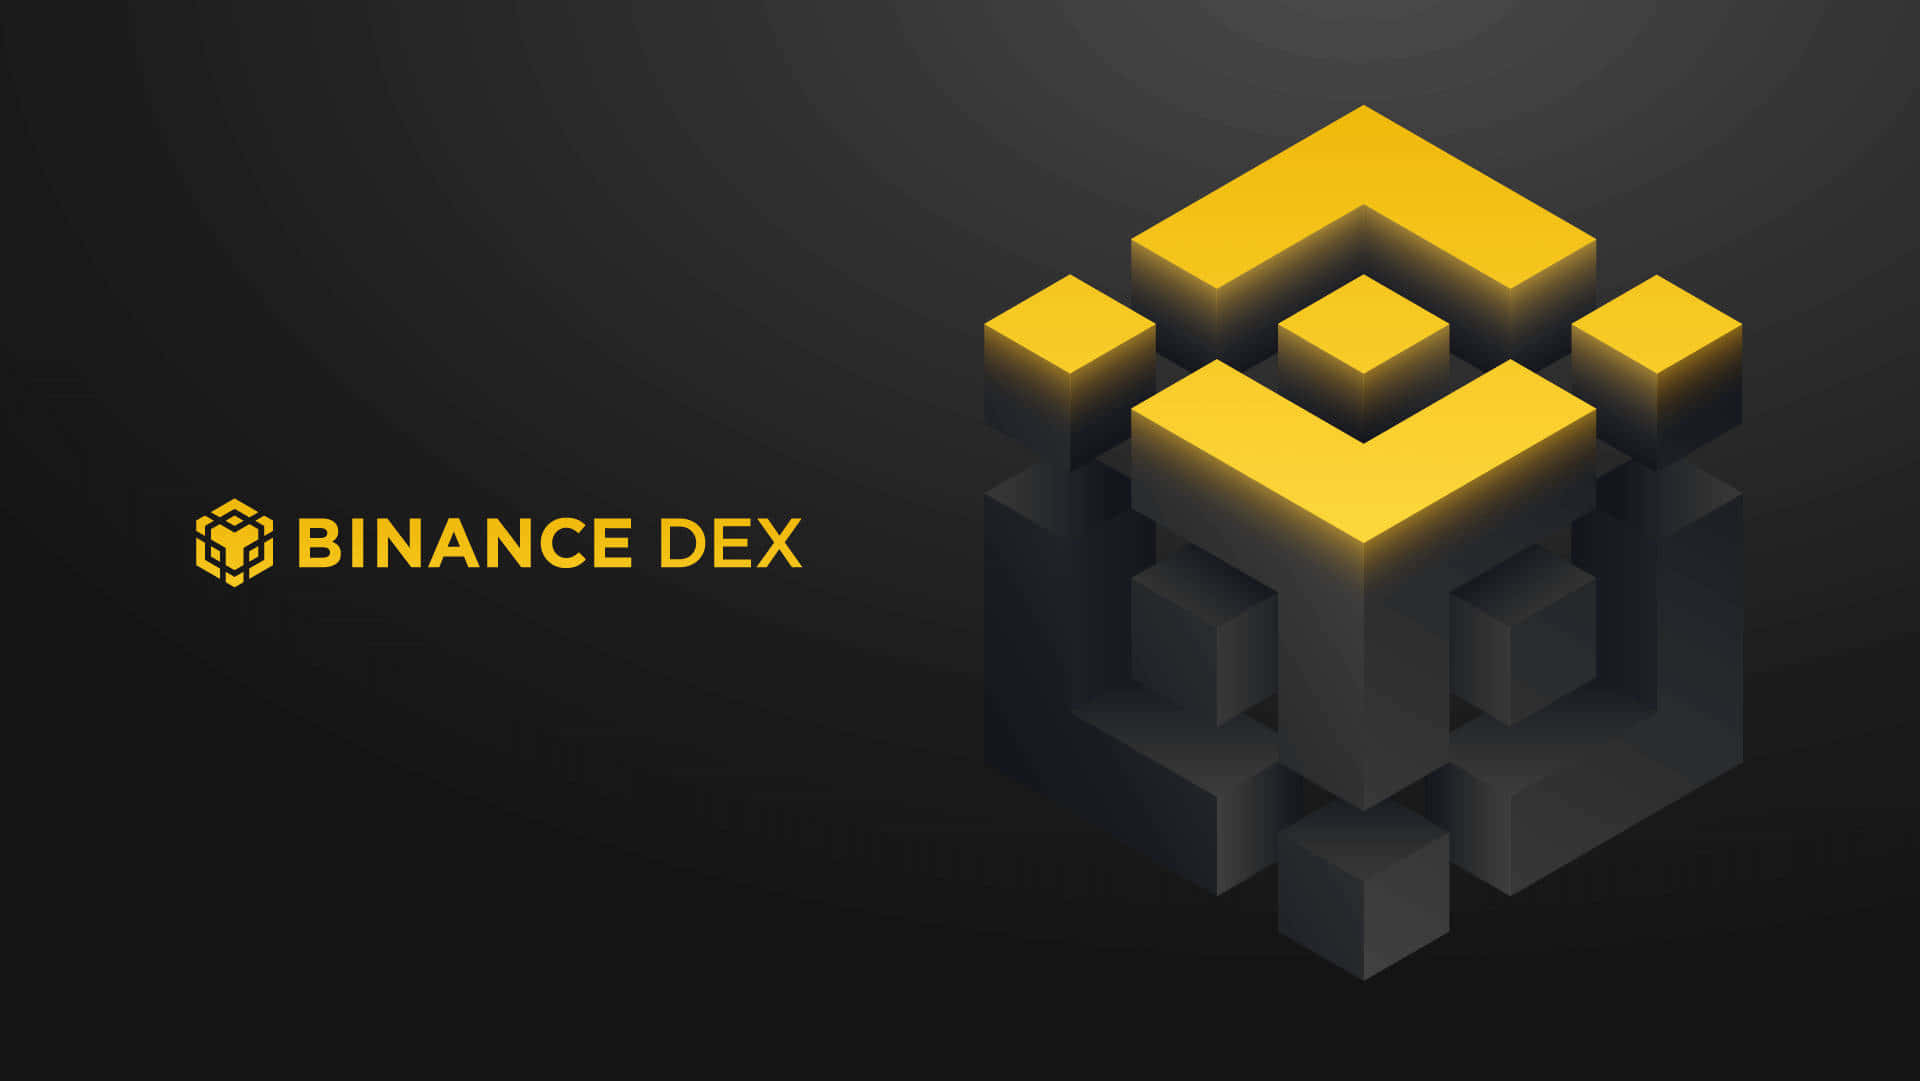 “Secure Your Funds with Binance”